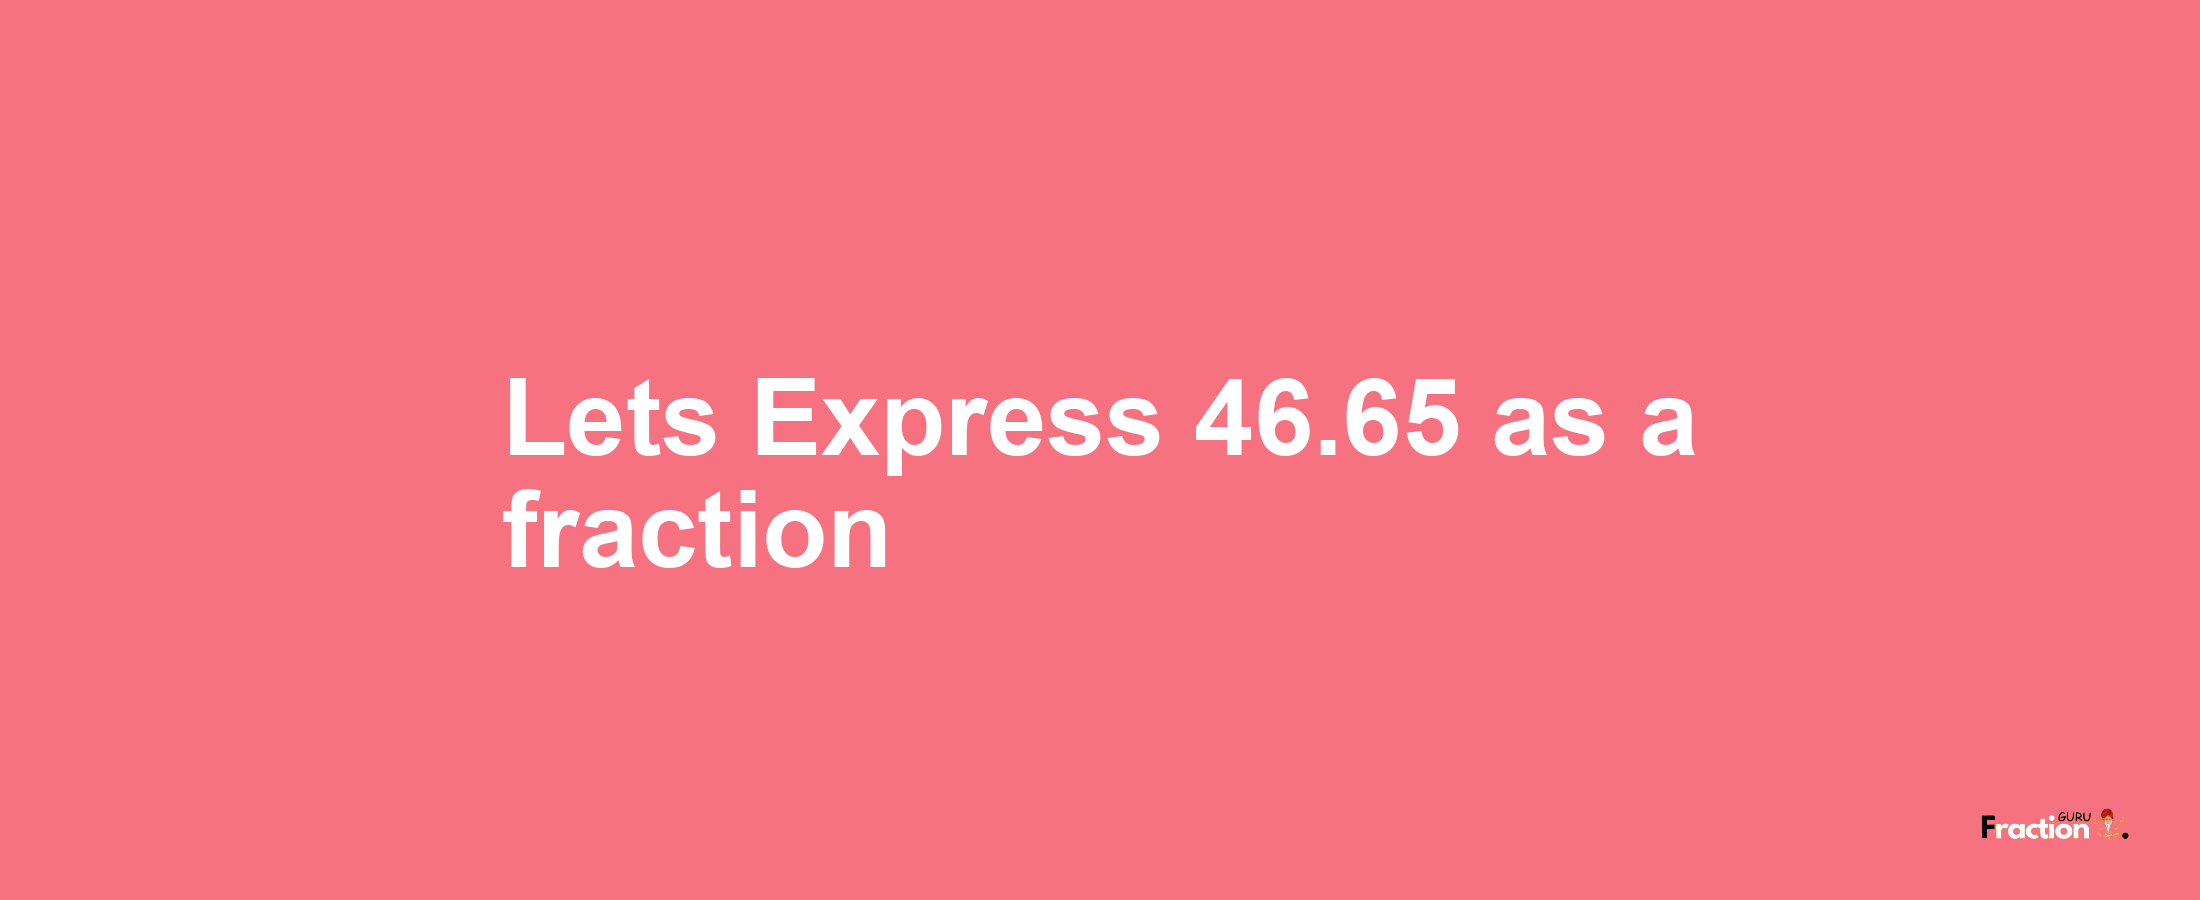 Lets Express 46.65 as afraction